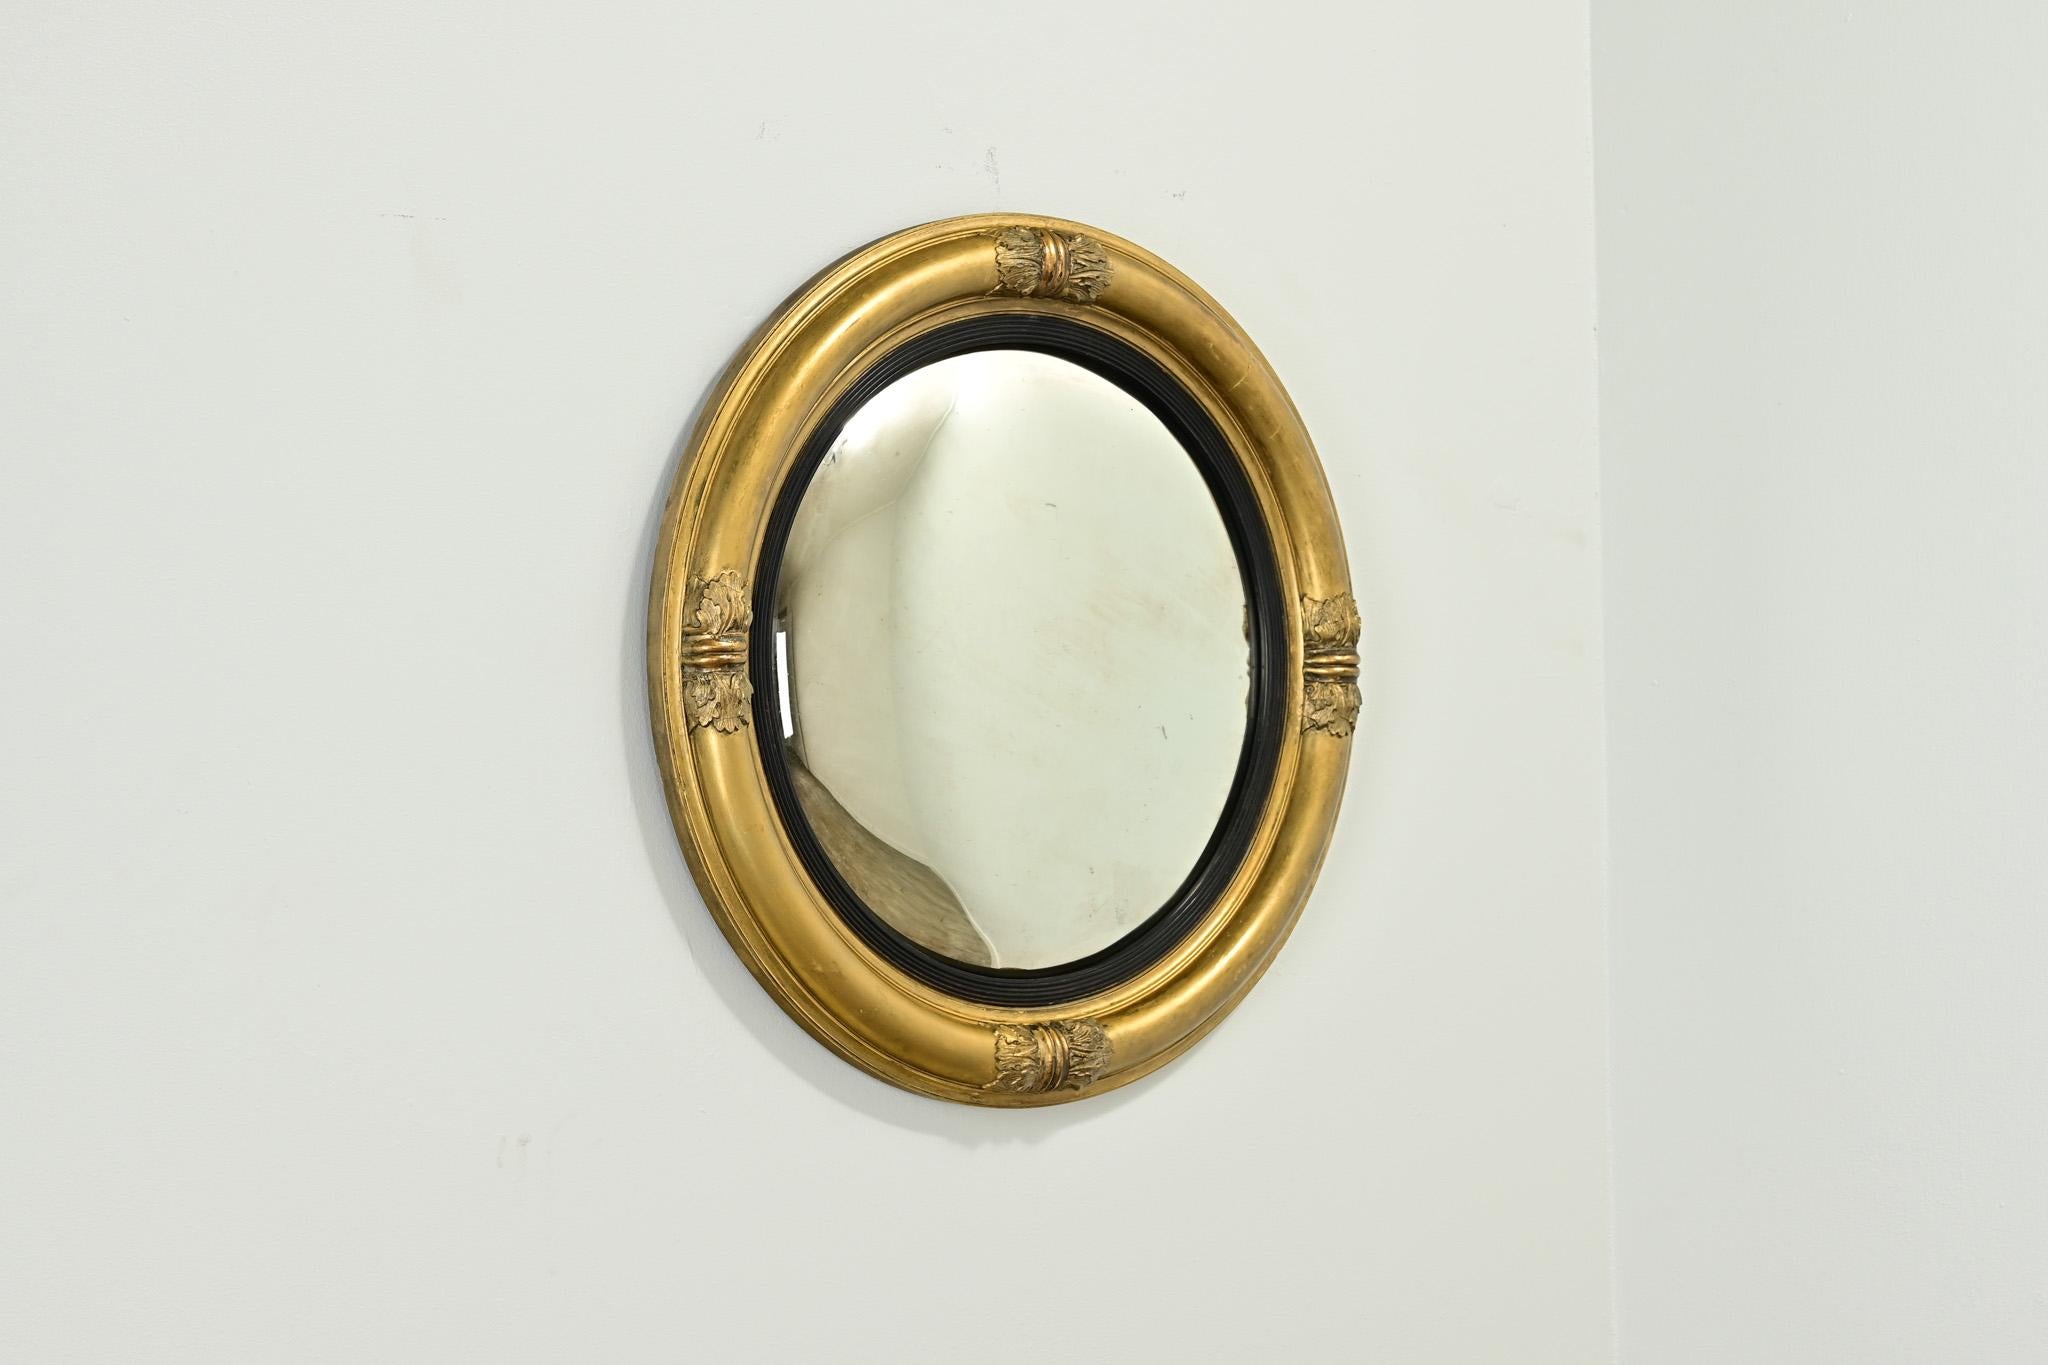 An elegant English gold gilt convex mirror. The antique convex mirror plate is surrounded with an ebonized trim and a gold gilt frame with four carved designs. Fixed with a circular bracket and ready to be hung in your interior. Make sure to view